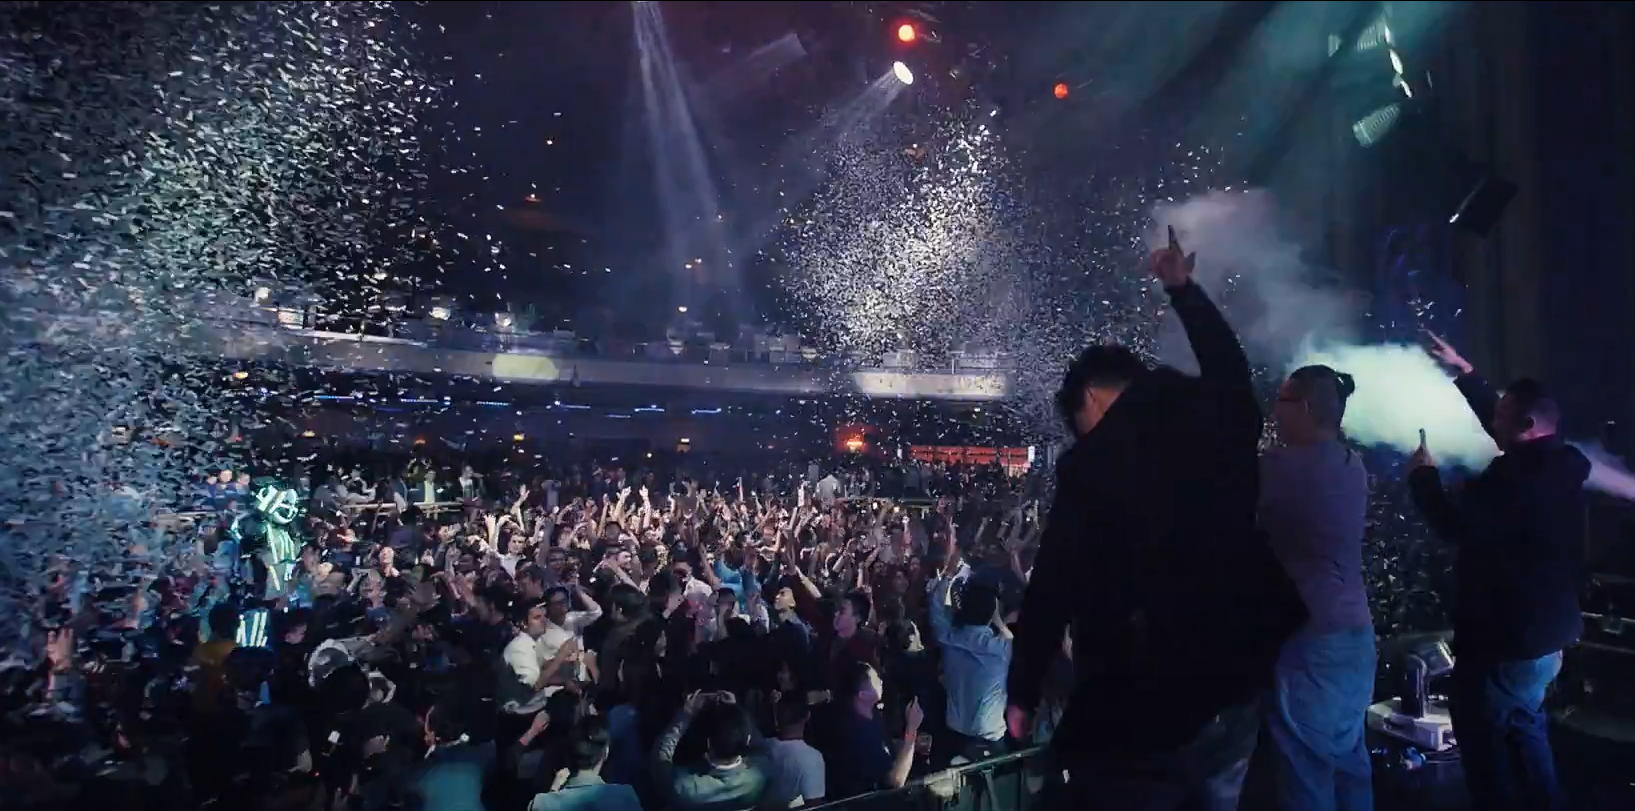 confetti in the air at a party rave